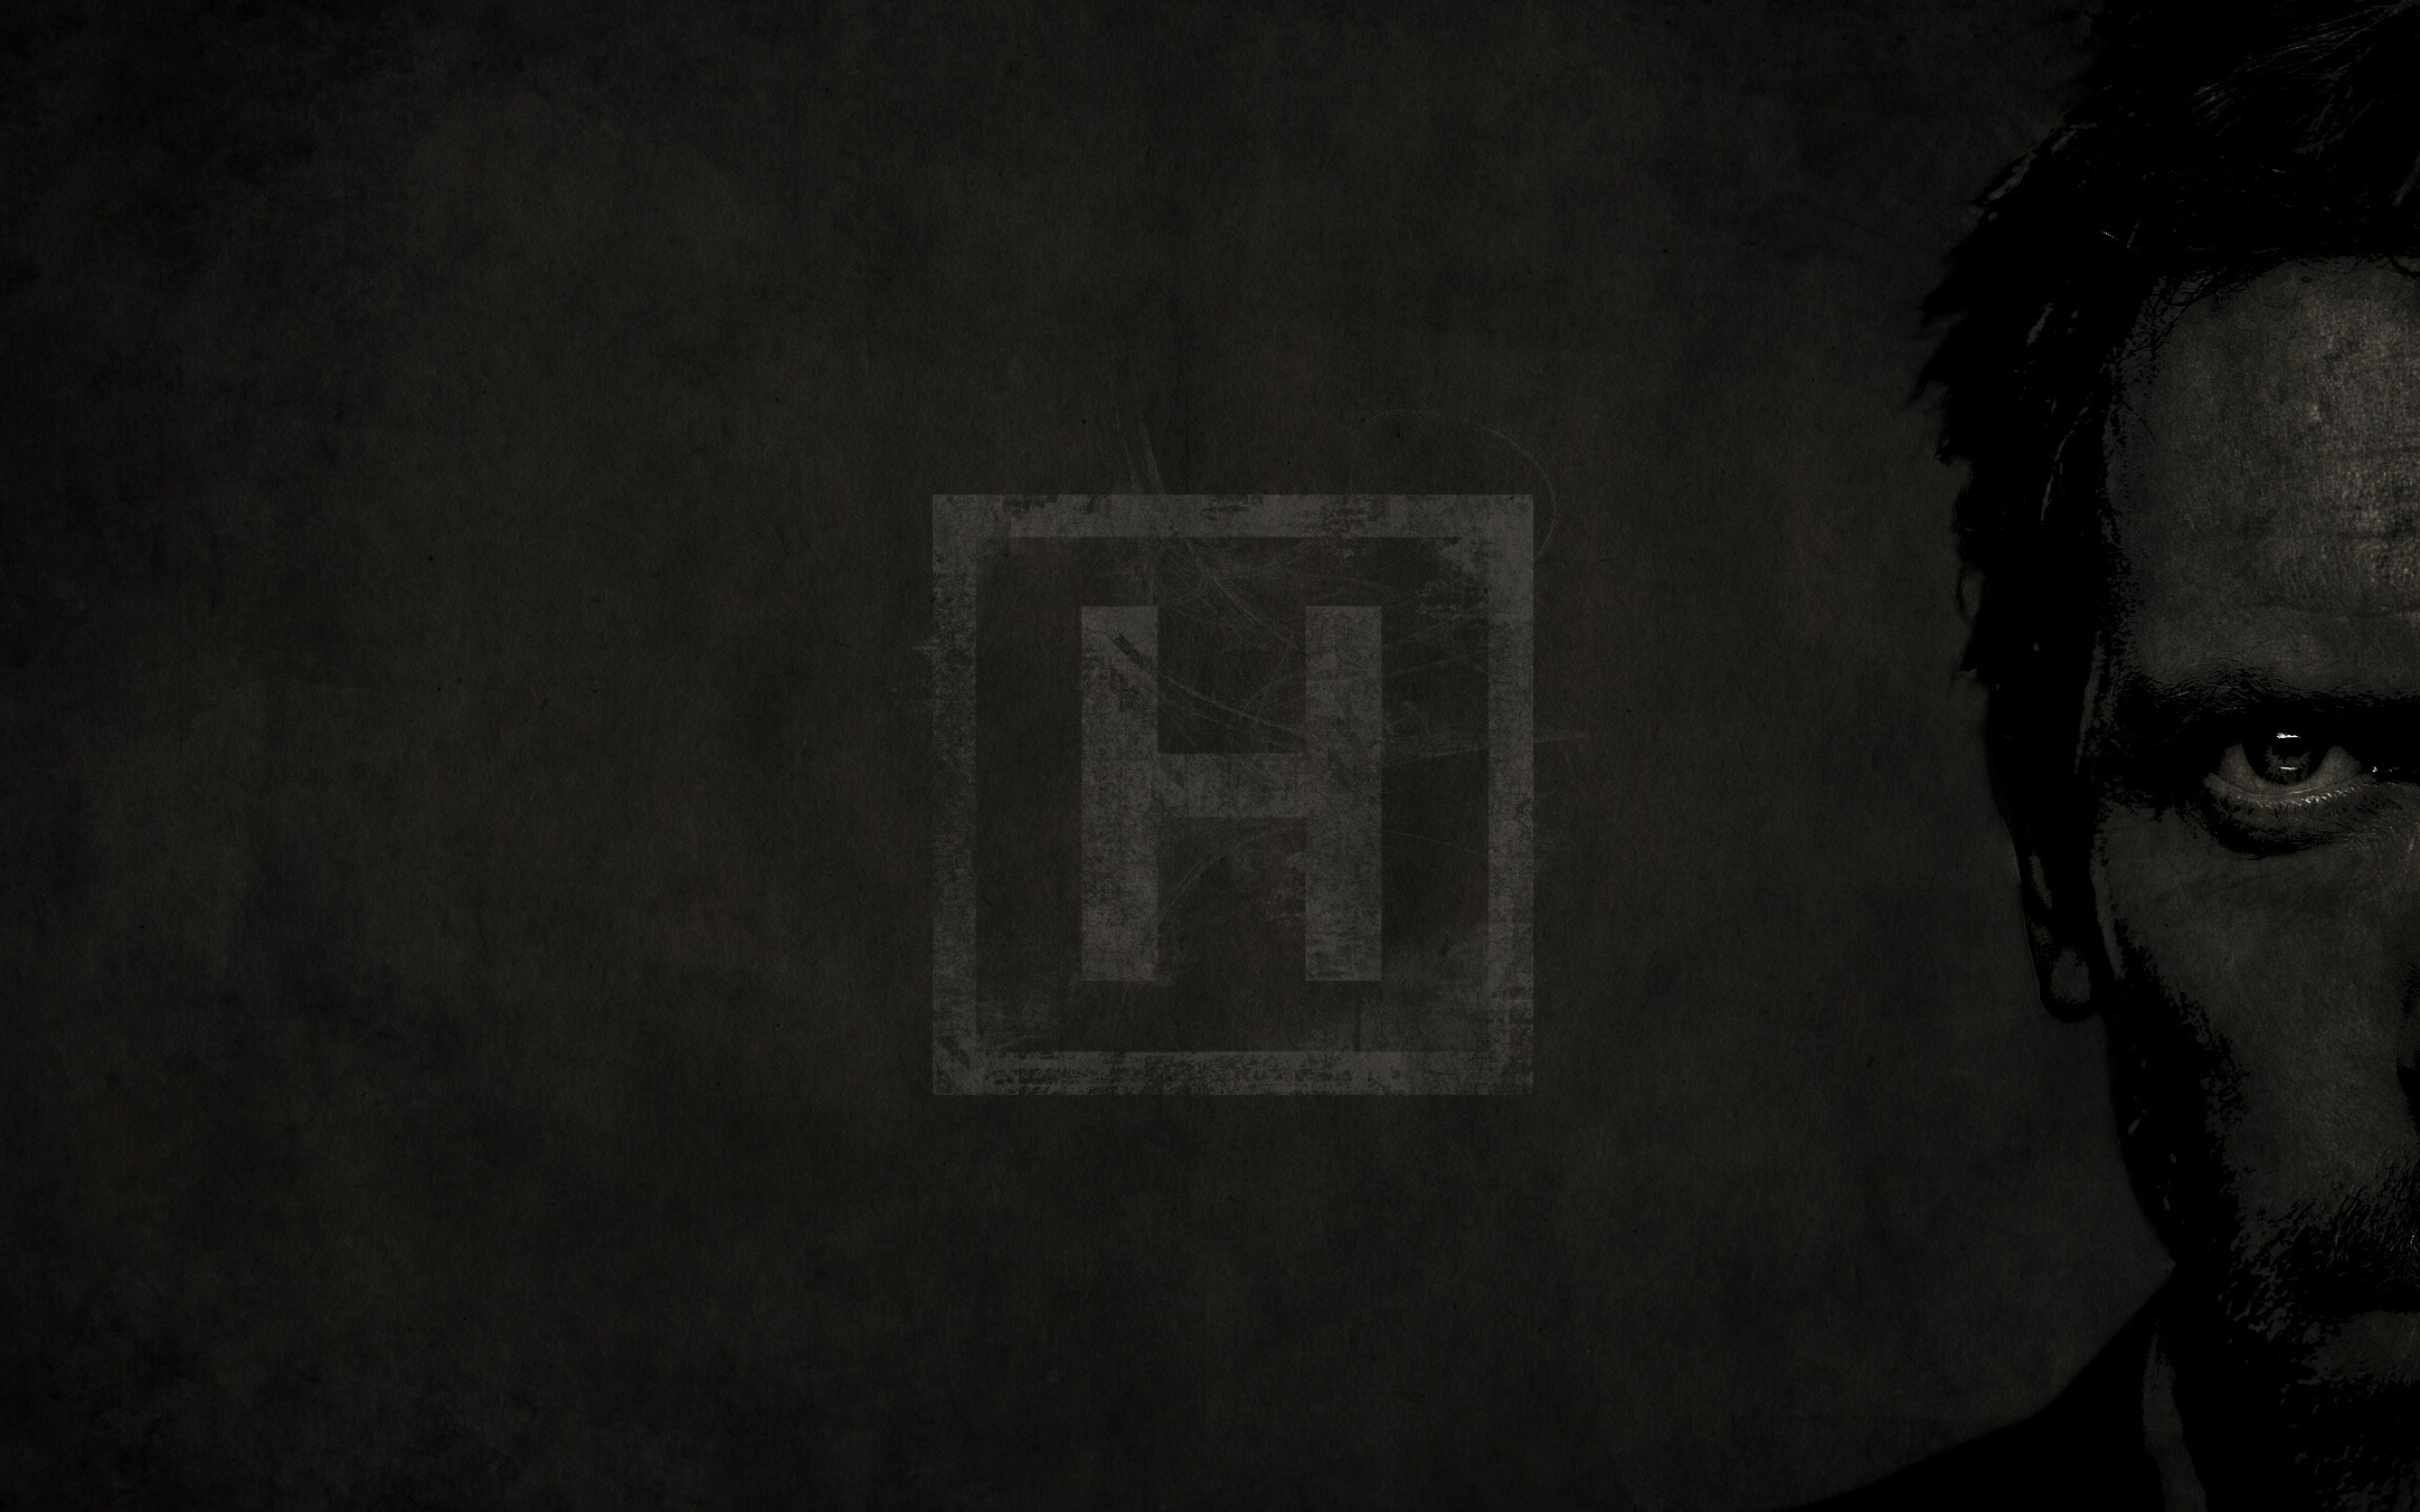 House M.D.: The most-watched television program in the world in 2008. 2560x1600 HD Background.